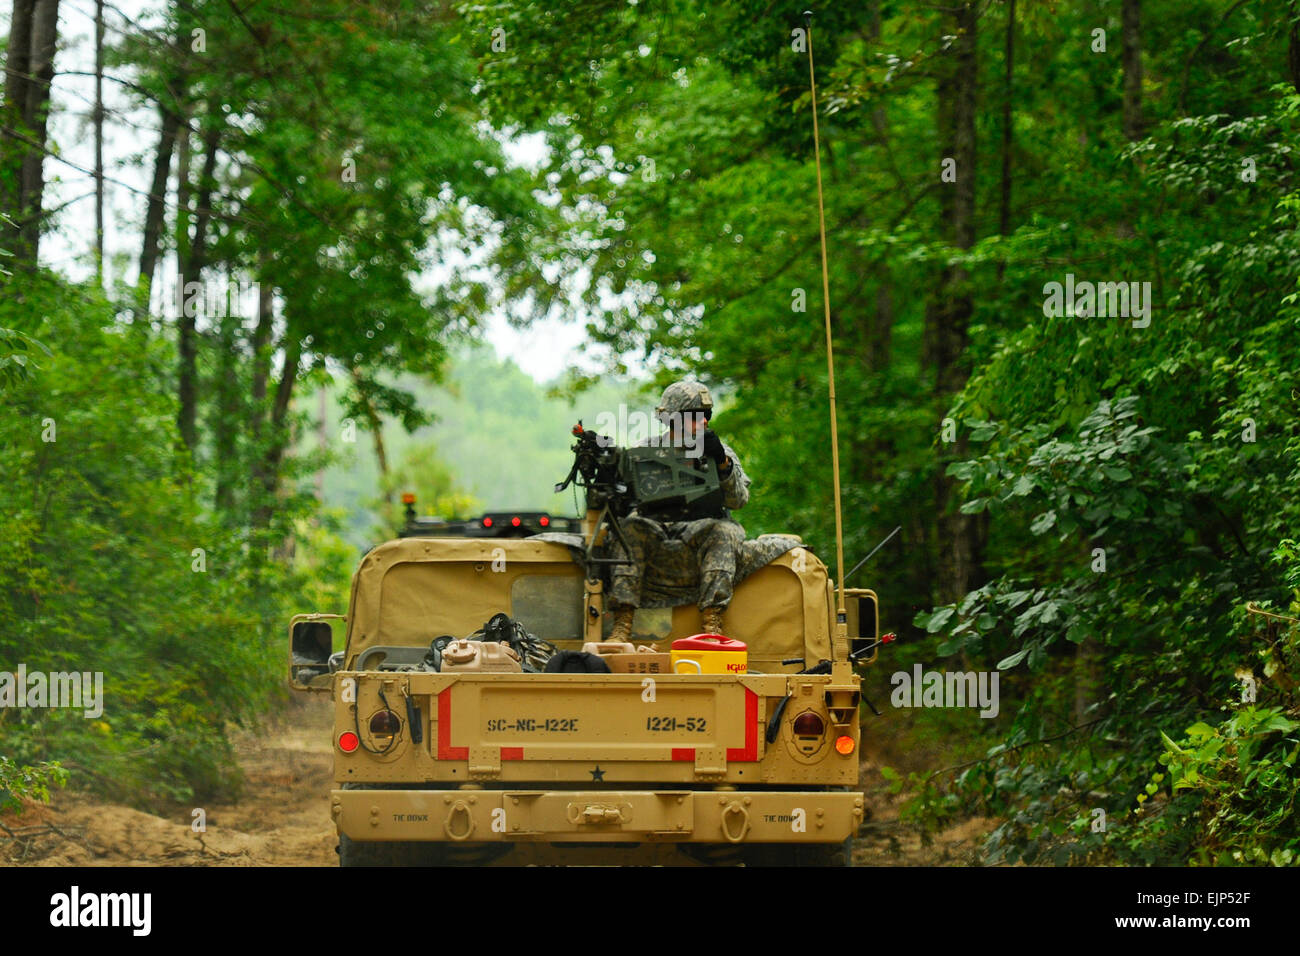 A U.S. Soldier, assigned to 1221st Route Clearance Company, South Carolina Army National Guard, gunner on top a HMMVV scans for threats during route clearance operations at McCrady Training Center, Eastover, S.C., June 24, 2014.  The Soldier’s mission is to locate improvised explosive devices during mounted convoy operations and dismounted walking patrols and dispose of IED’s once located.  U.S. Air National Guard photo by Tech. Sgt. Jorge Intriago Stock Photo